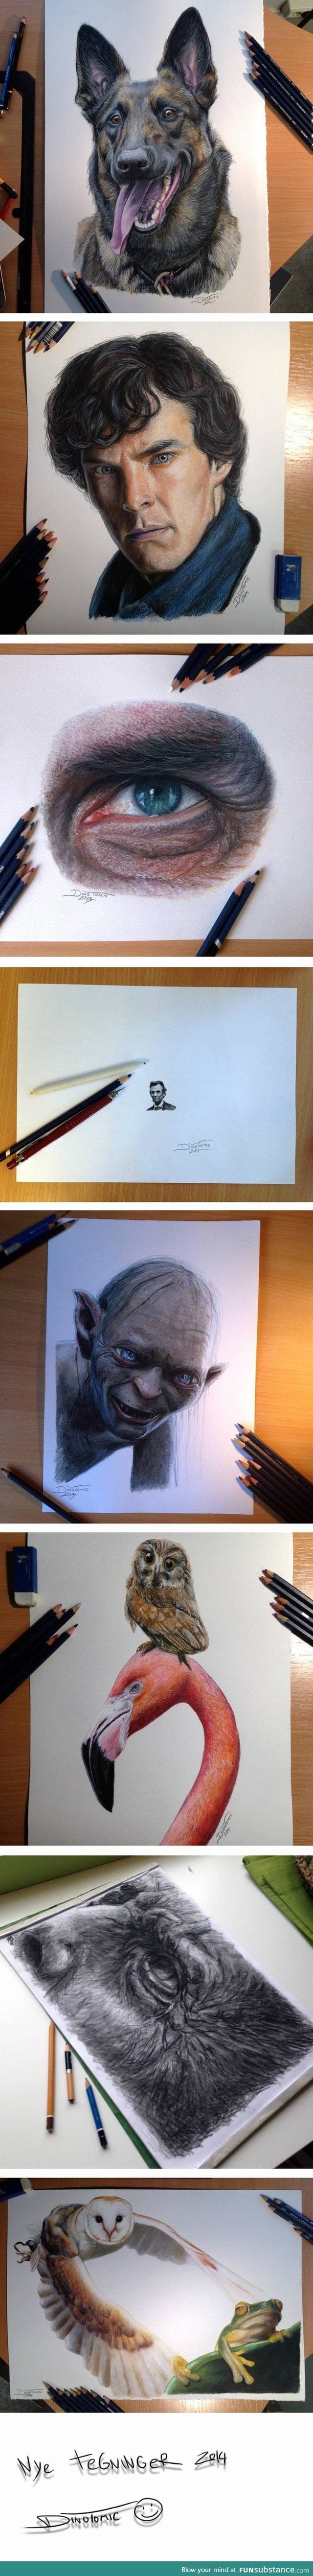 Some impressive photo realistic drawings